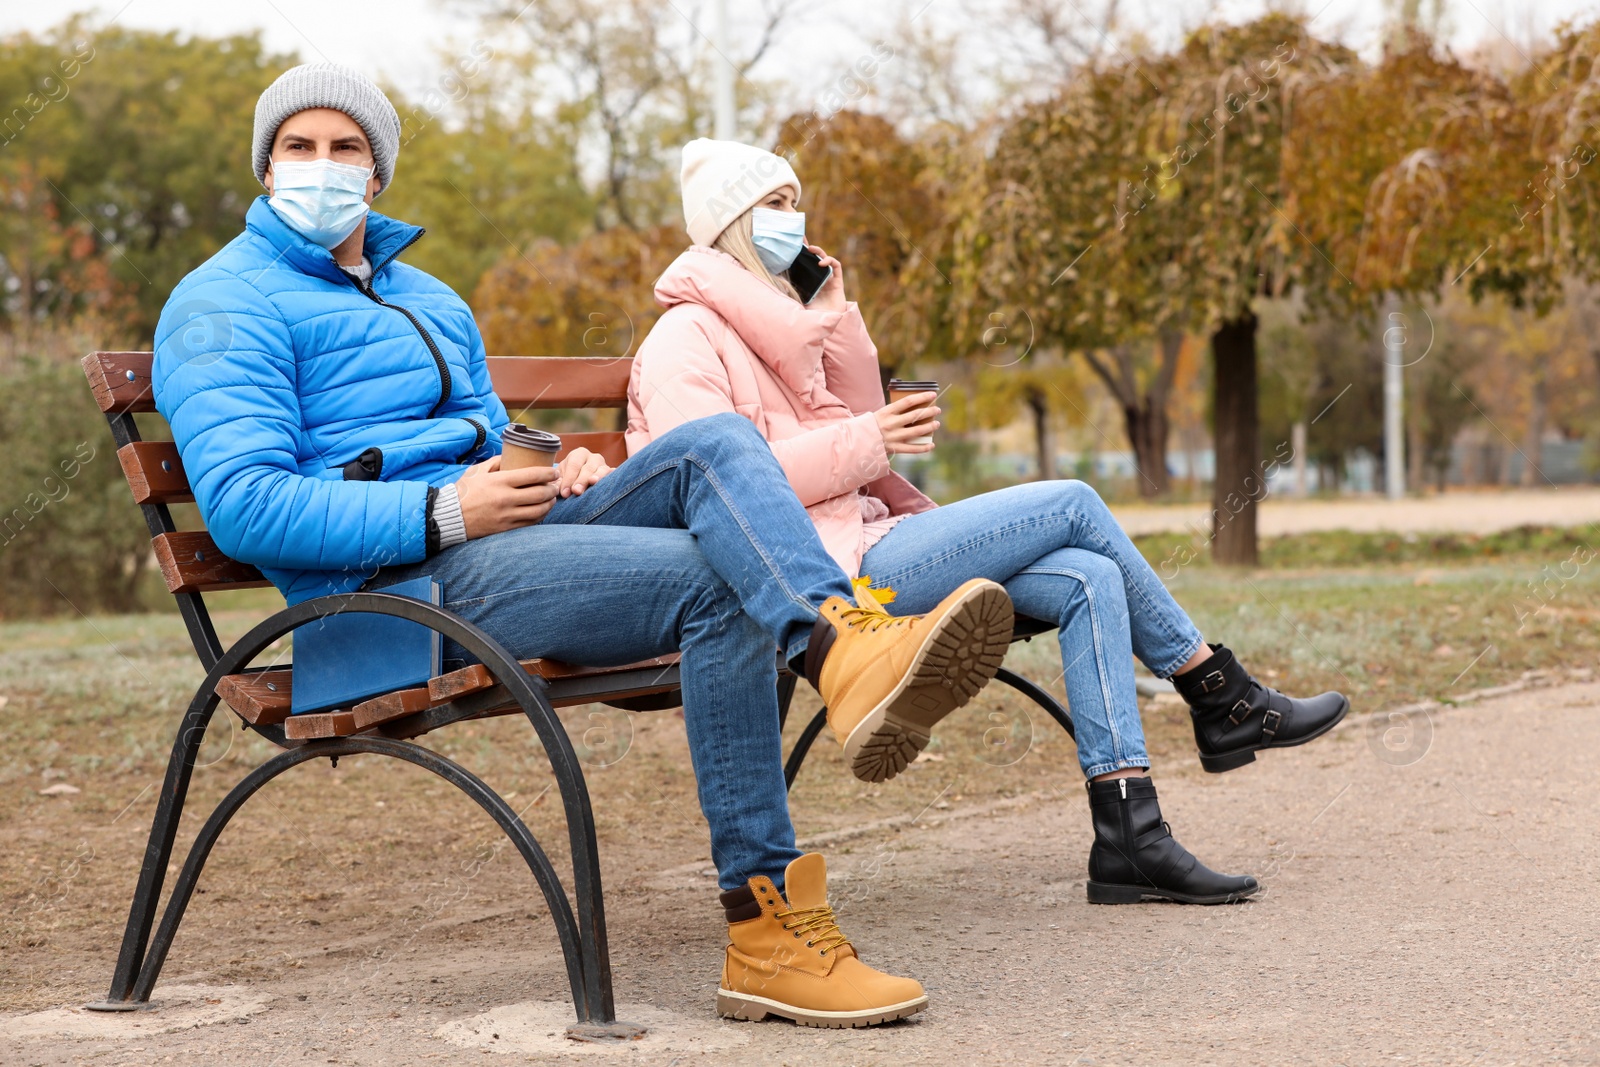 Photo of People in medical masks keeping distance while sitting on bench outdoors. Protective measures during coronavirus quarantine